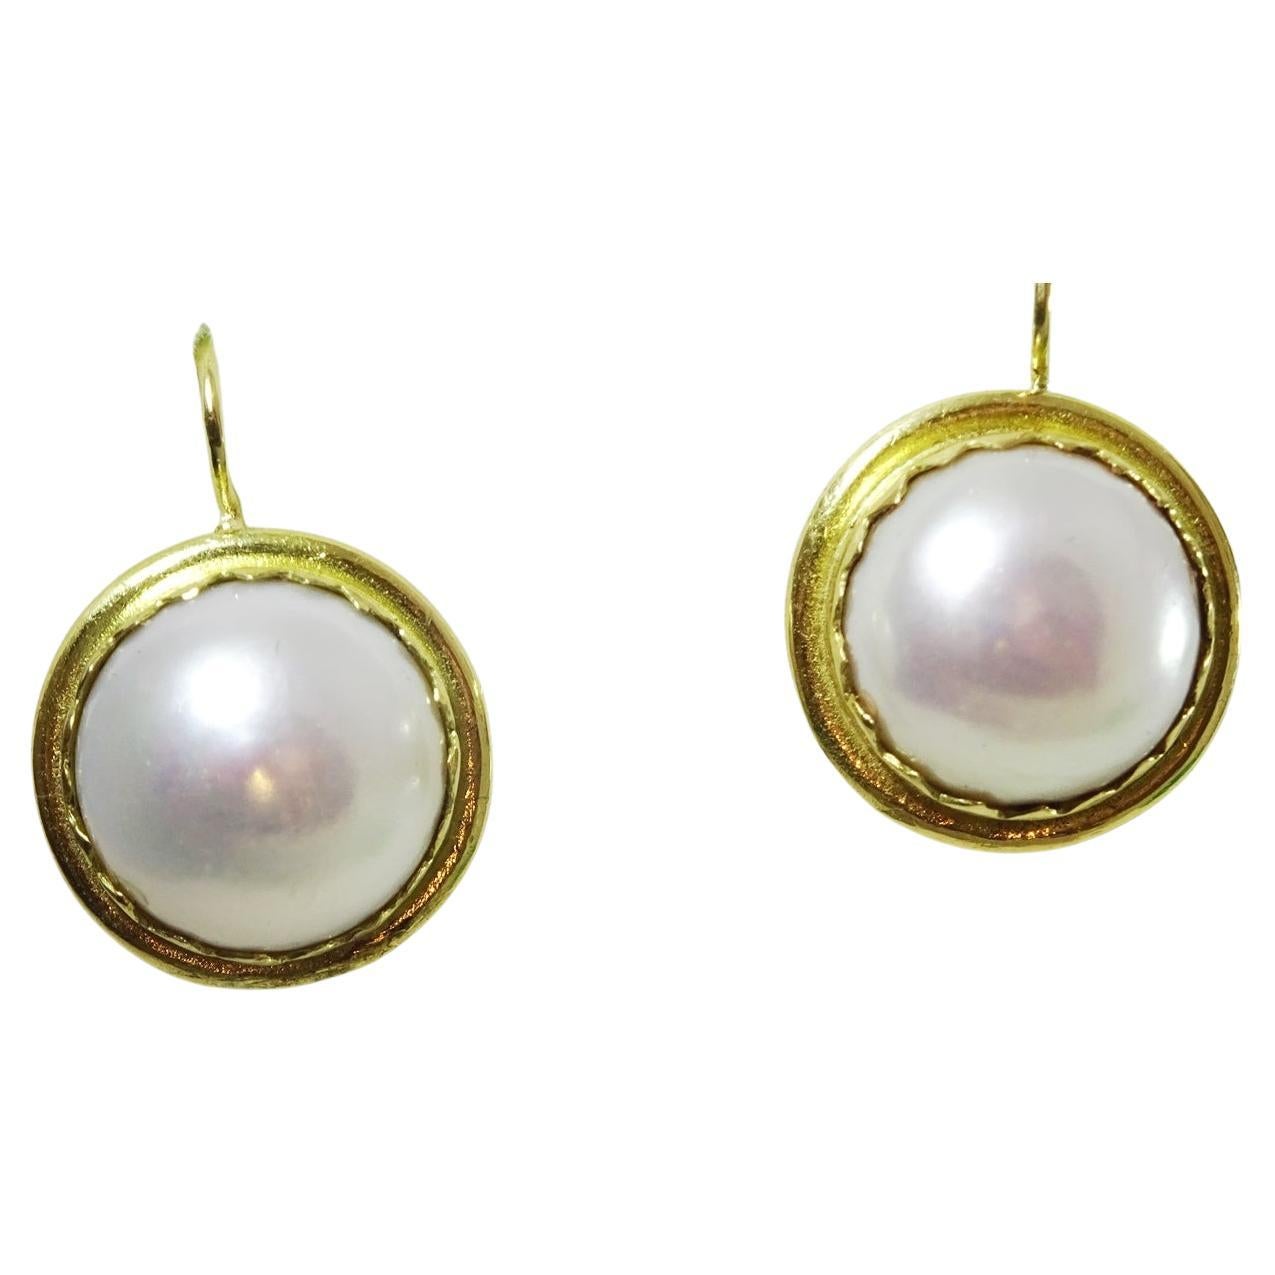 15 mm Round Pearl and 18 karat Gold Earrings. For Sale